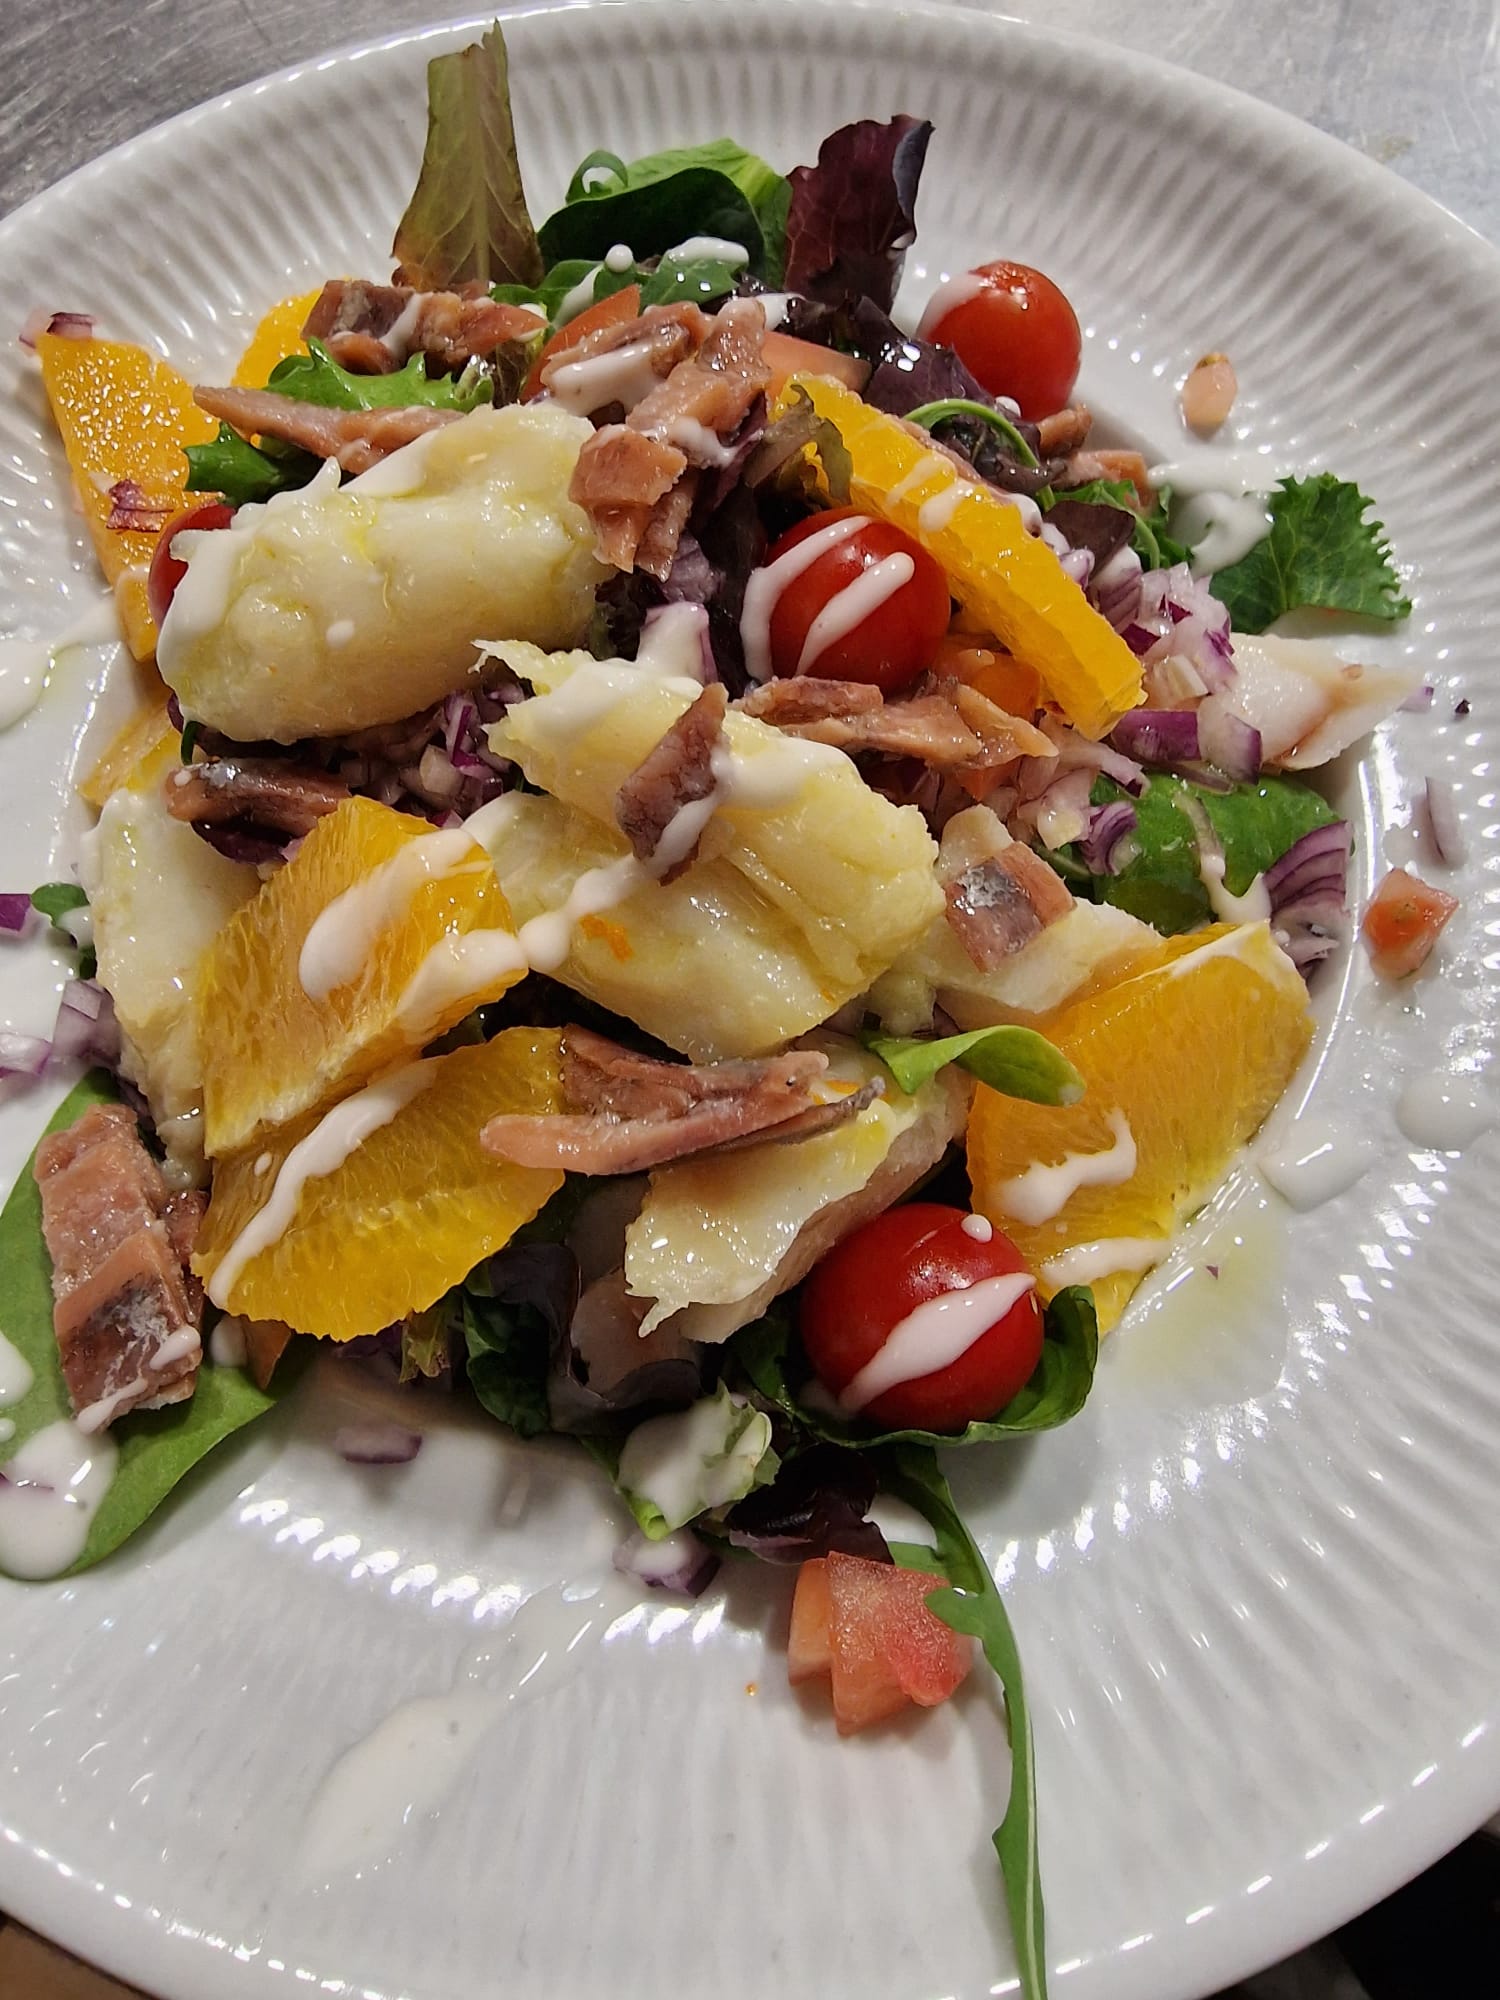 Warm salad of cod, oranges and anchovy vinaigrette